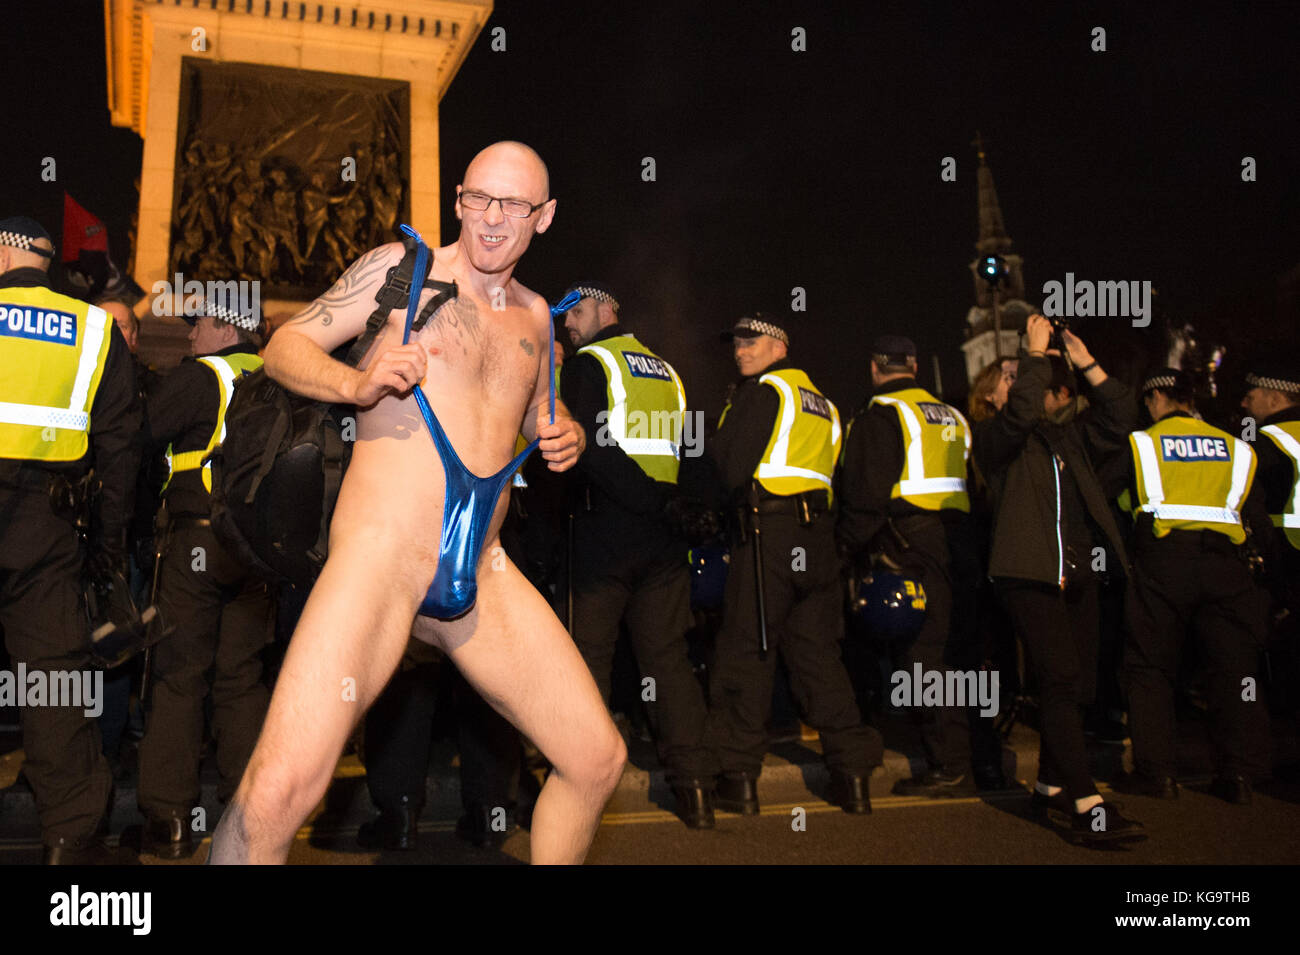 London, United Kingdom. 05th Nov, 2017. Million Mask March 2017 takes place in central London. A protester in a 'mankini' gyrate behind a line of police. Credit: Peter Manning/Alamy Live News Stock Photo